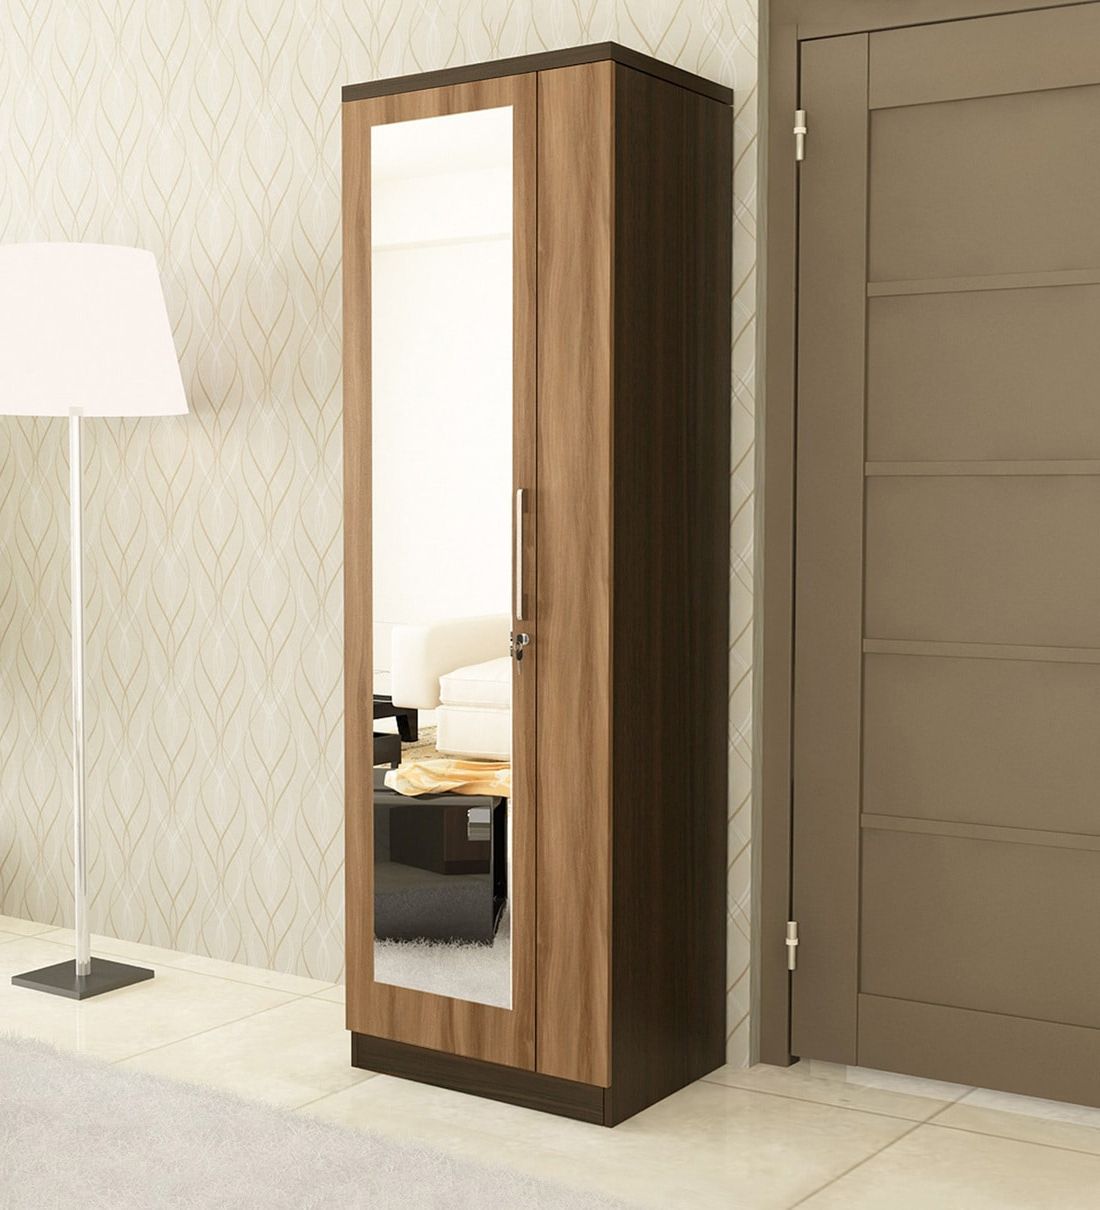 Buy Kosmo Ken 1 Door Wardrobe In Walnut & Natural Wenge Finish With Mirror  At 42% Offspacewood | Pepperfry Within One Door Mirrored Wardrobes (Gallery 13 of 20)